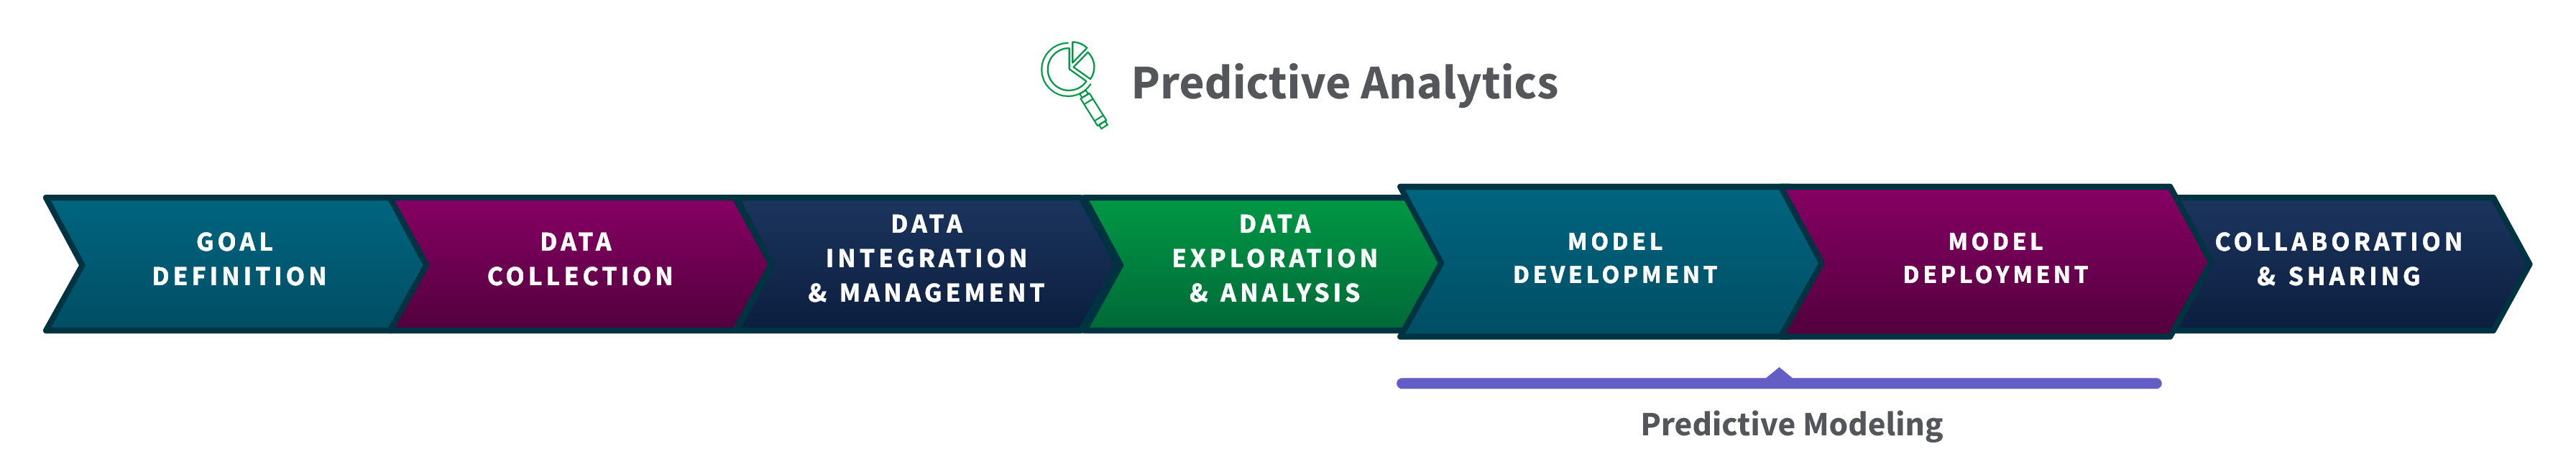 Diagram showing the relationship between predictive analytics and predictive modeling.